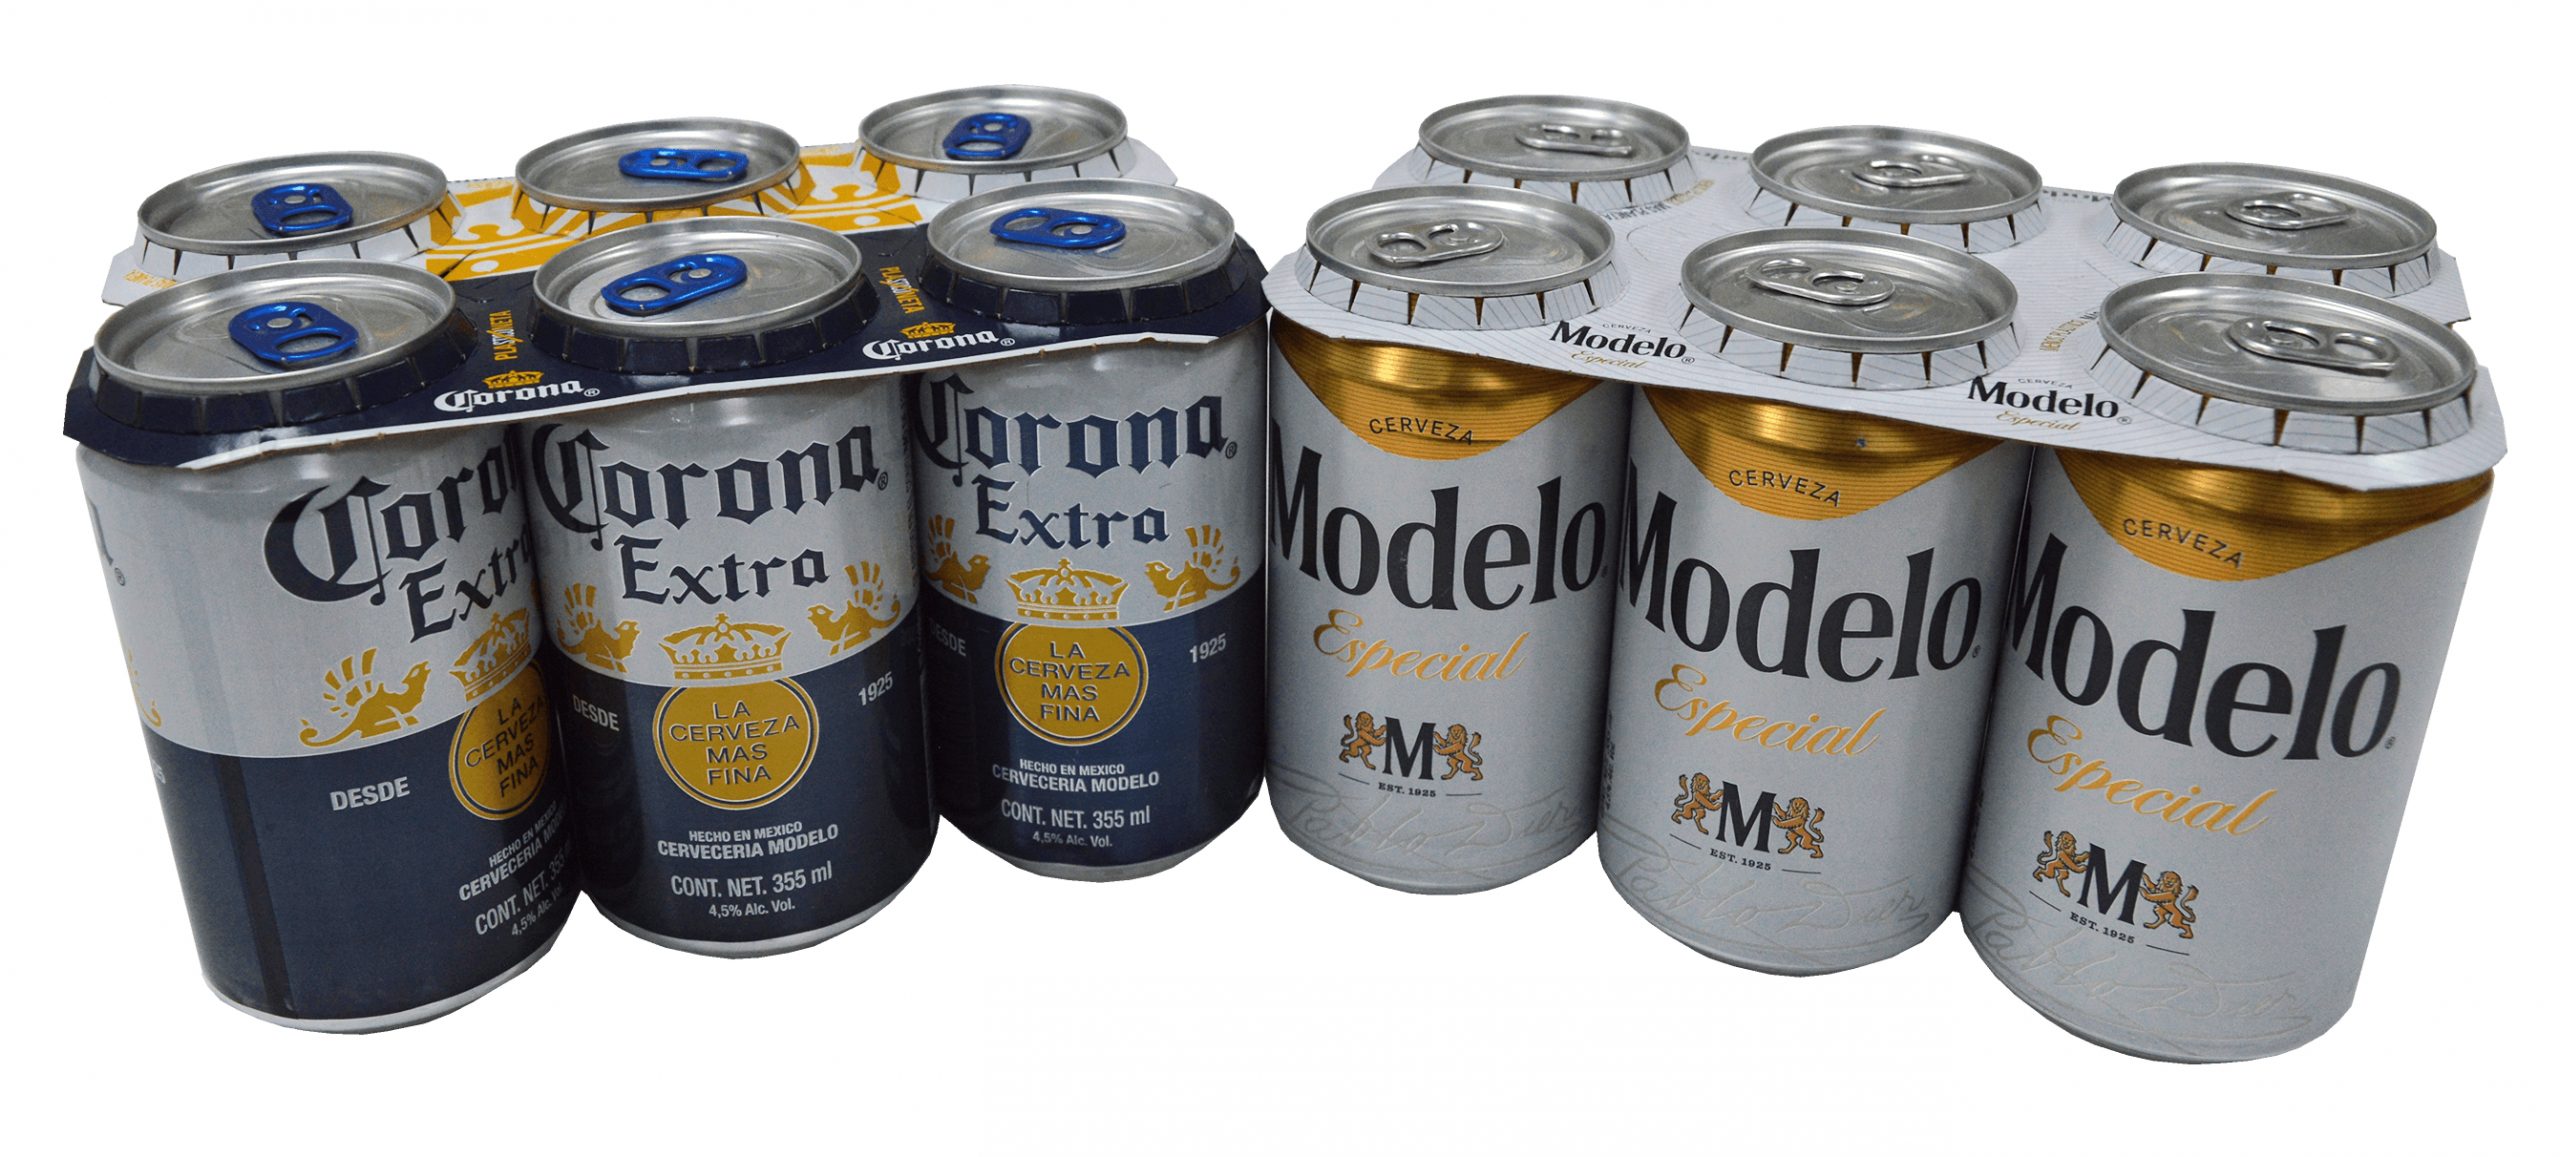 Grupo Modelo invests on eco-friendly can packaging rings from WestRock,  Grupo Gondi - Asia Food Journal